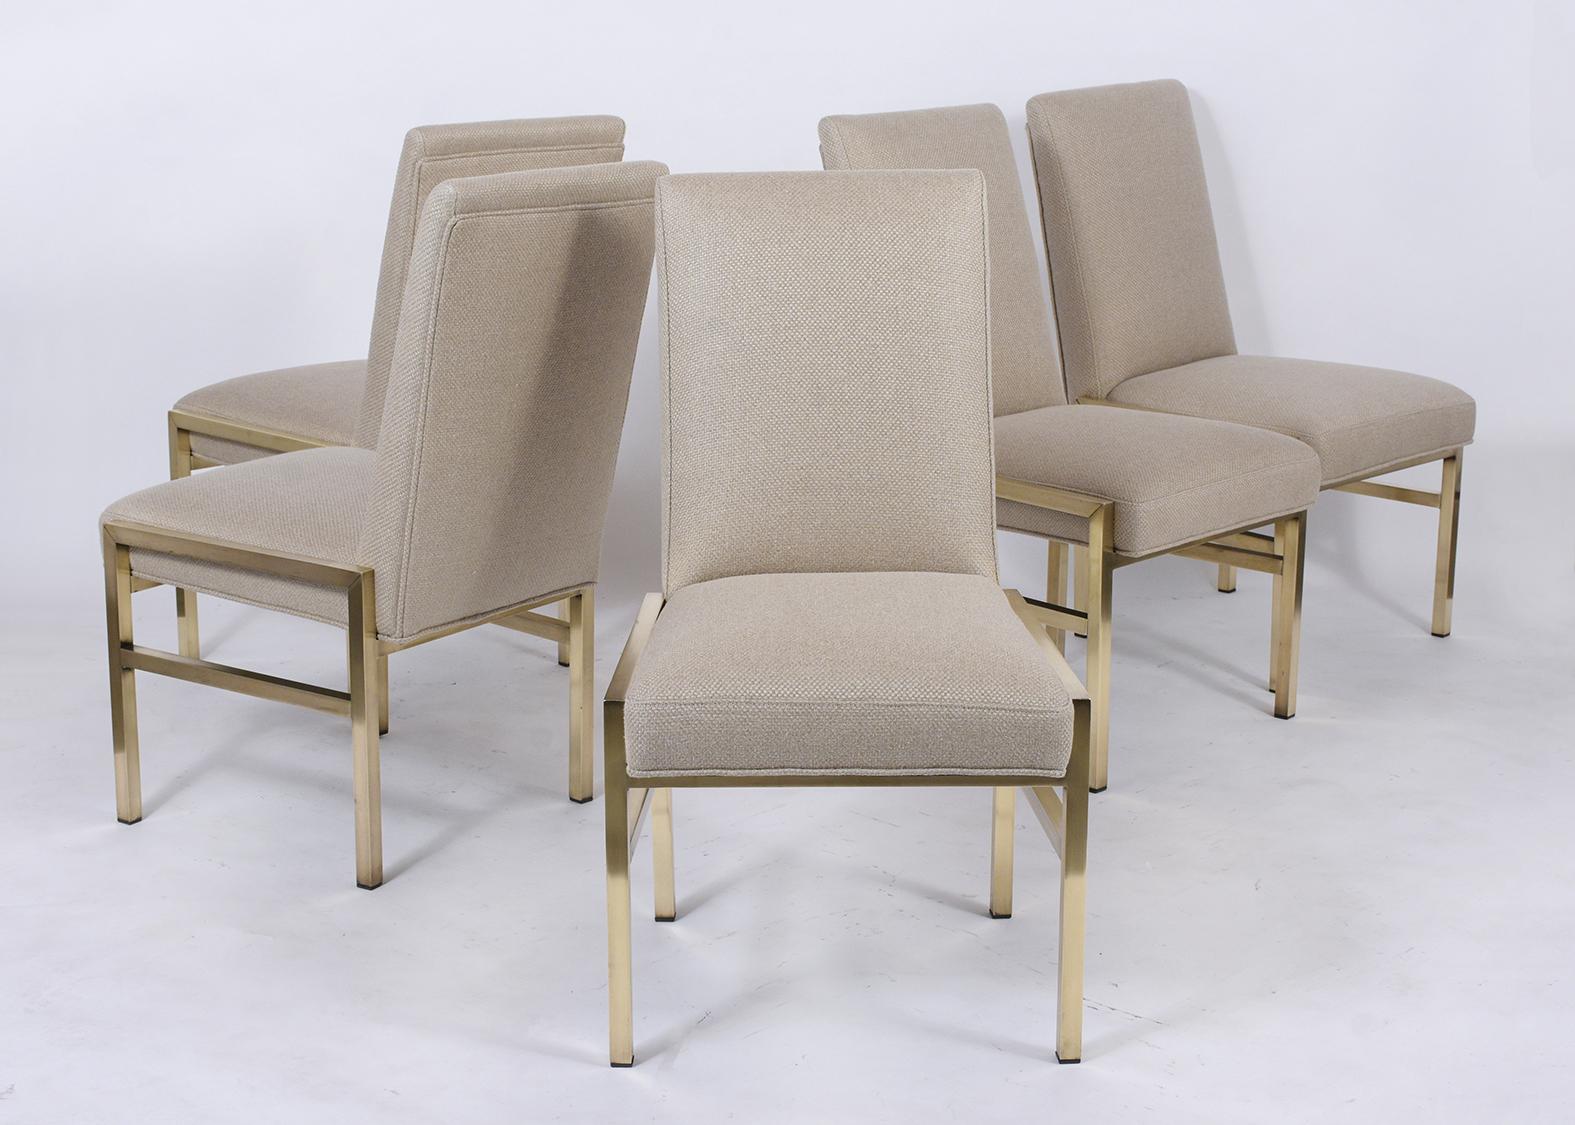 A remarkable set of ten Mastercraft dining chairs that are fully restored and feature a sturdy brass chair frame. This set of chairs has also been professionally reupholstered in a beige color wool fabric with topstitch details, slanted high